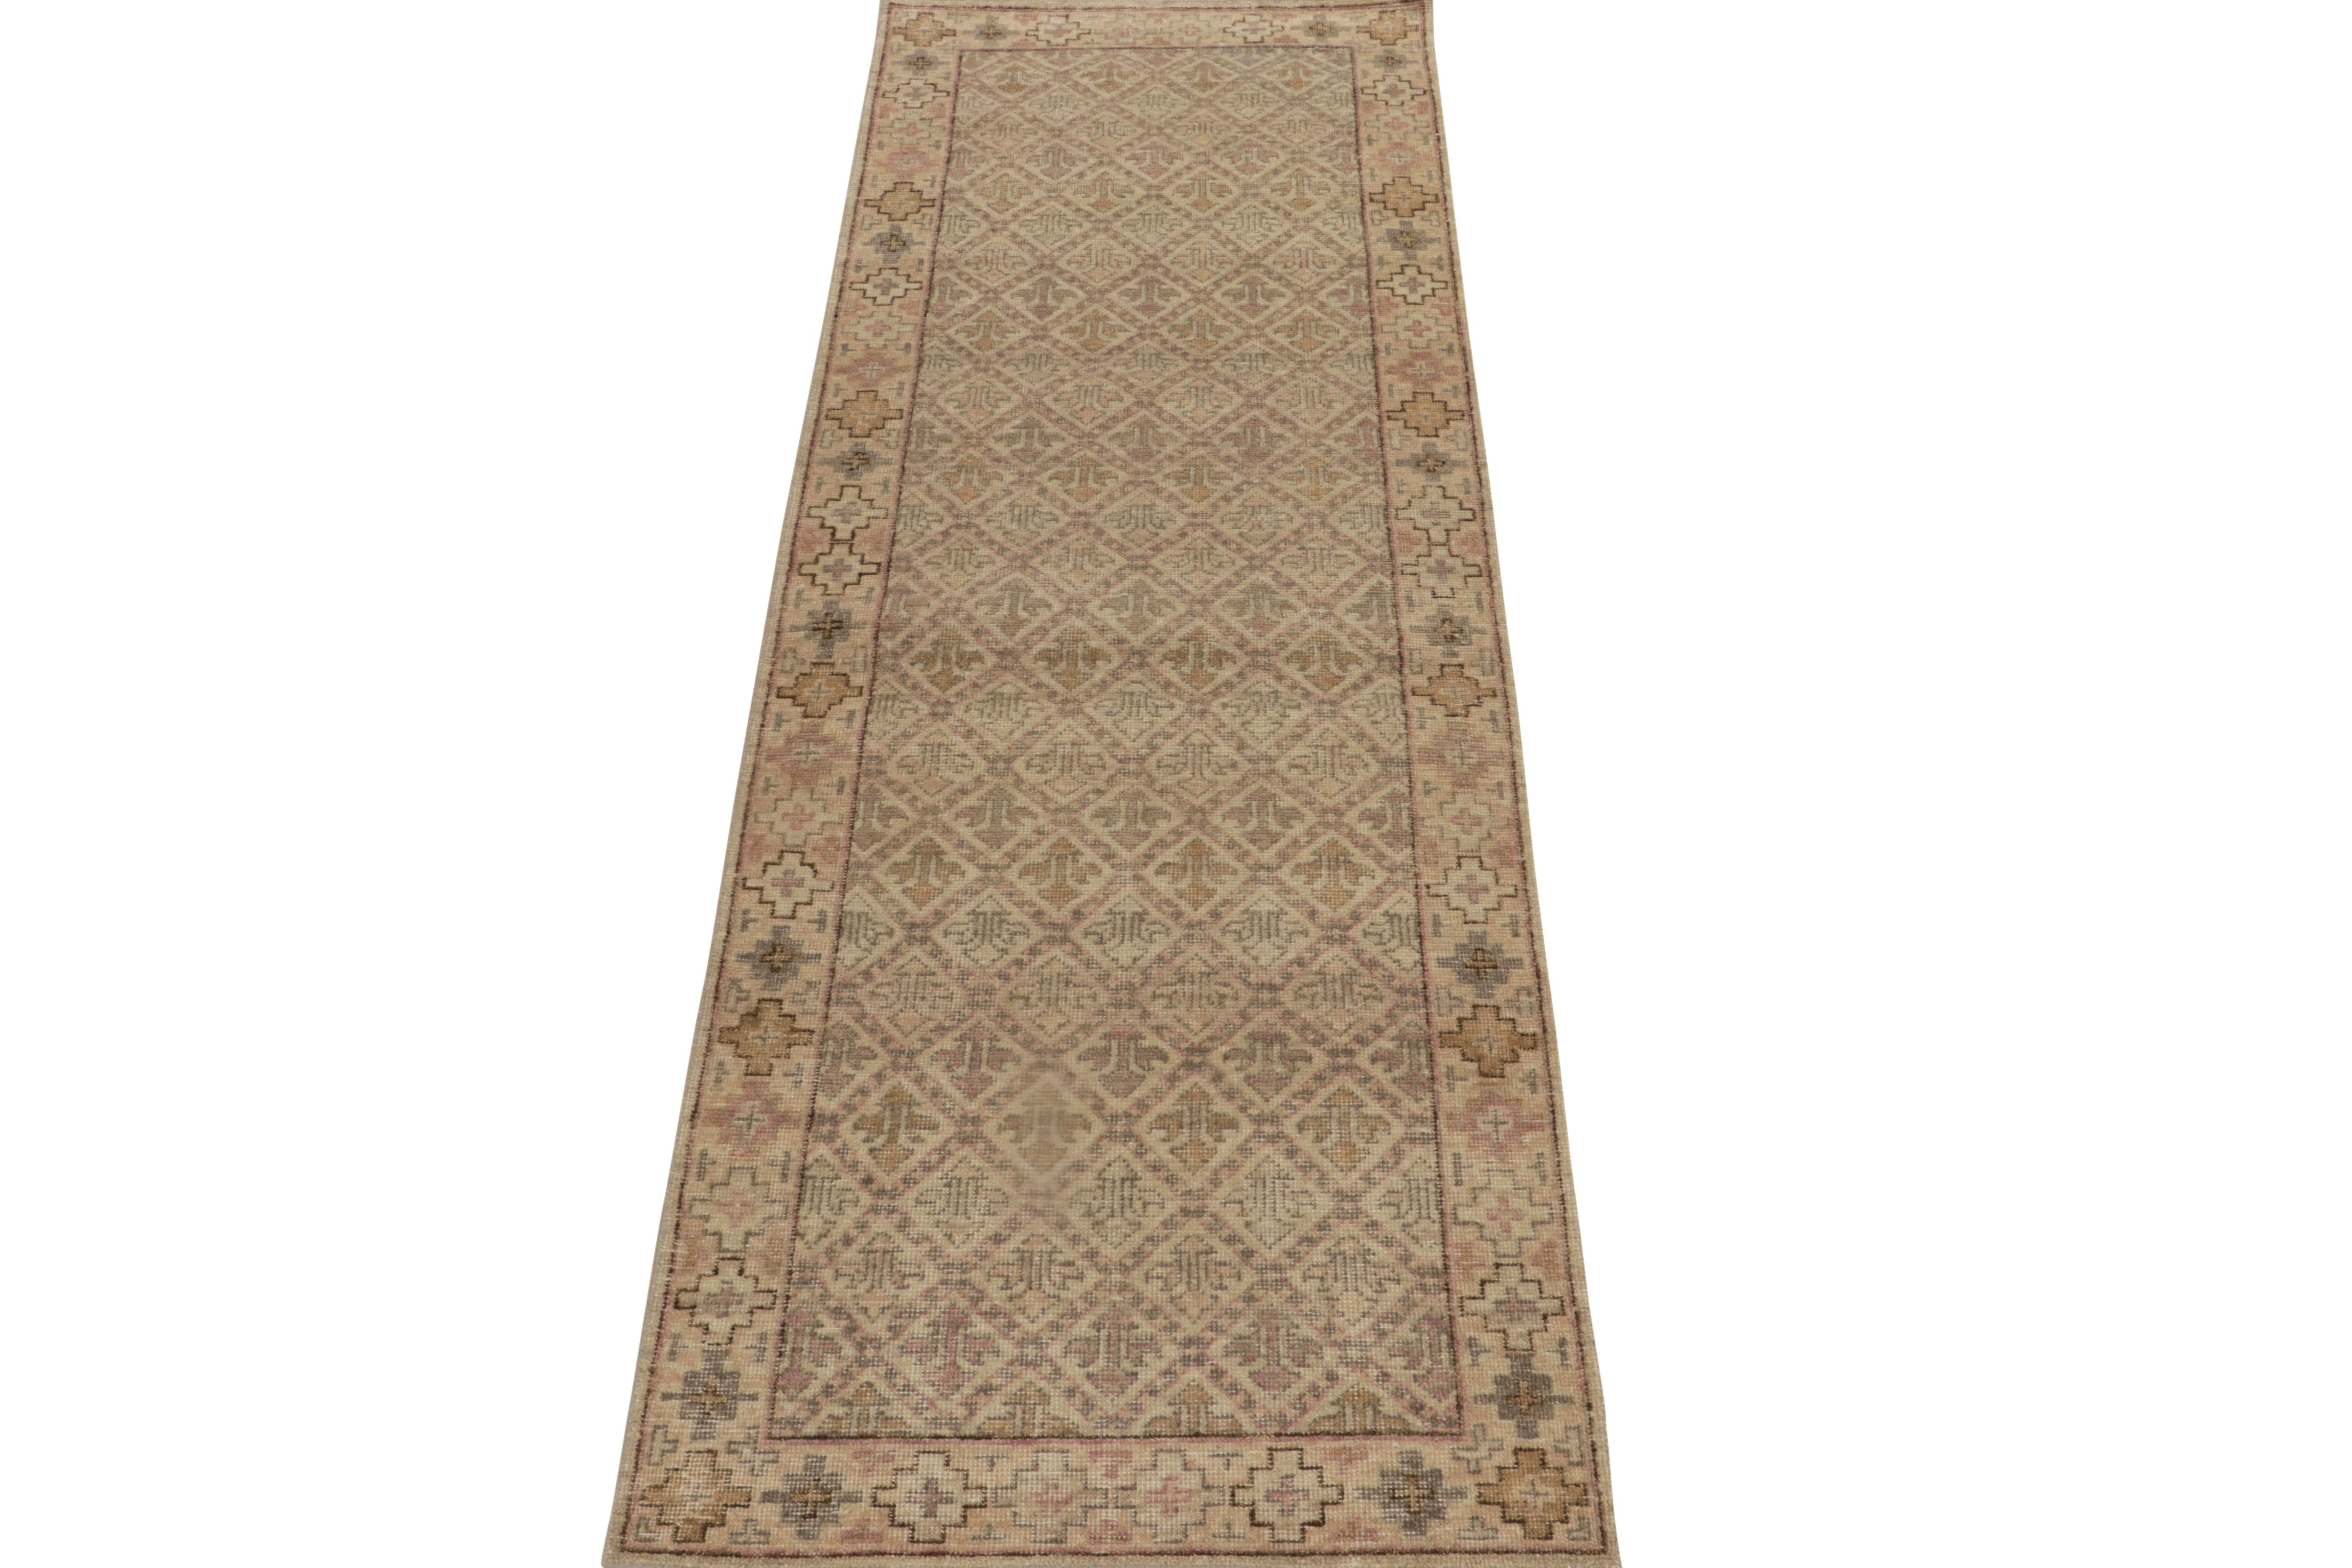 Indian Rug & Kilim’s Distressed Style Runner in Beige-Brown & Grey Tribal Patterns For Sale